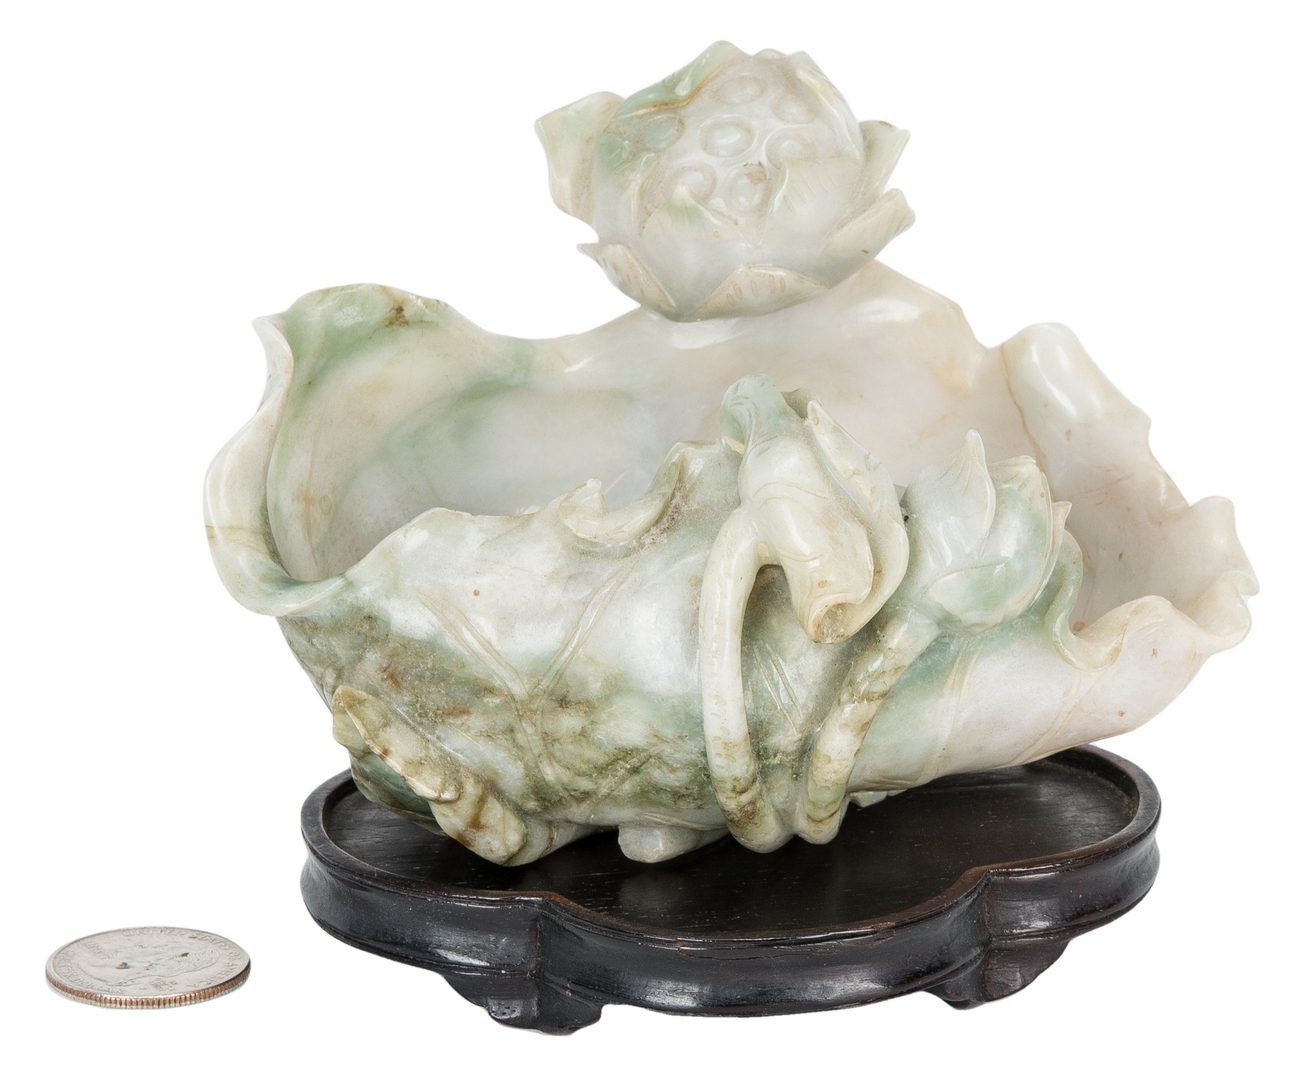 Lot 3: Carved Jade Lotus Blossom Bowl w/ Stand